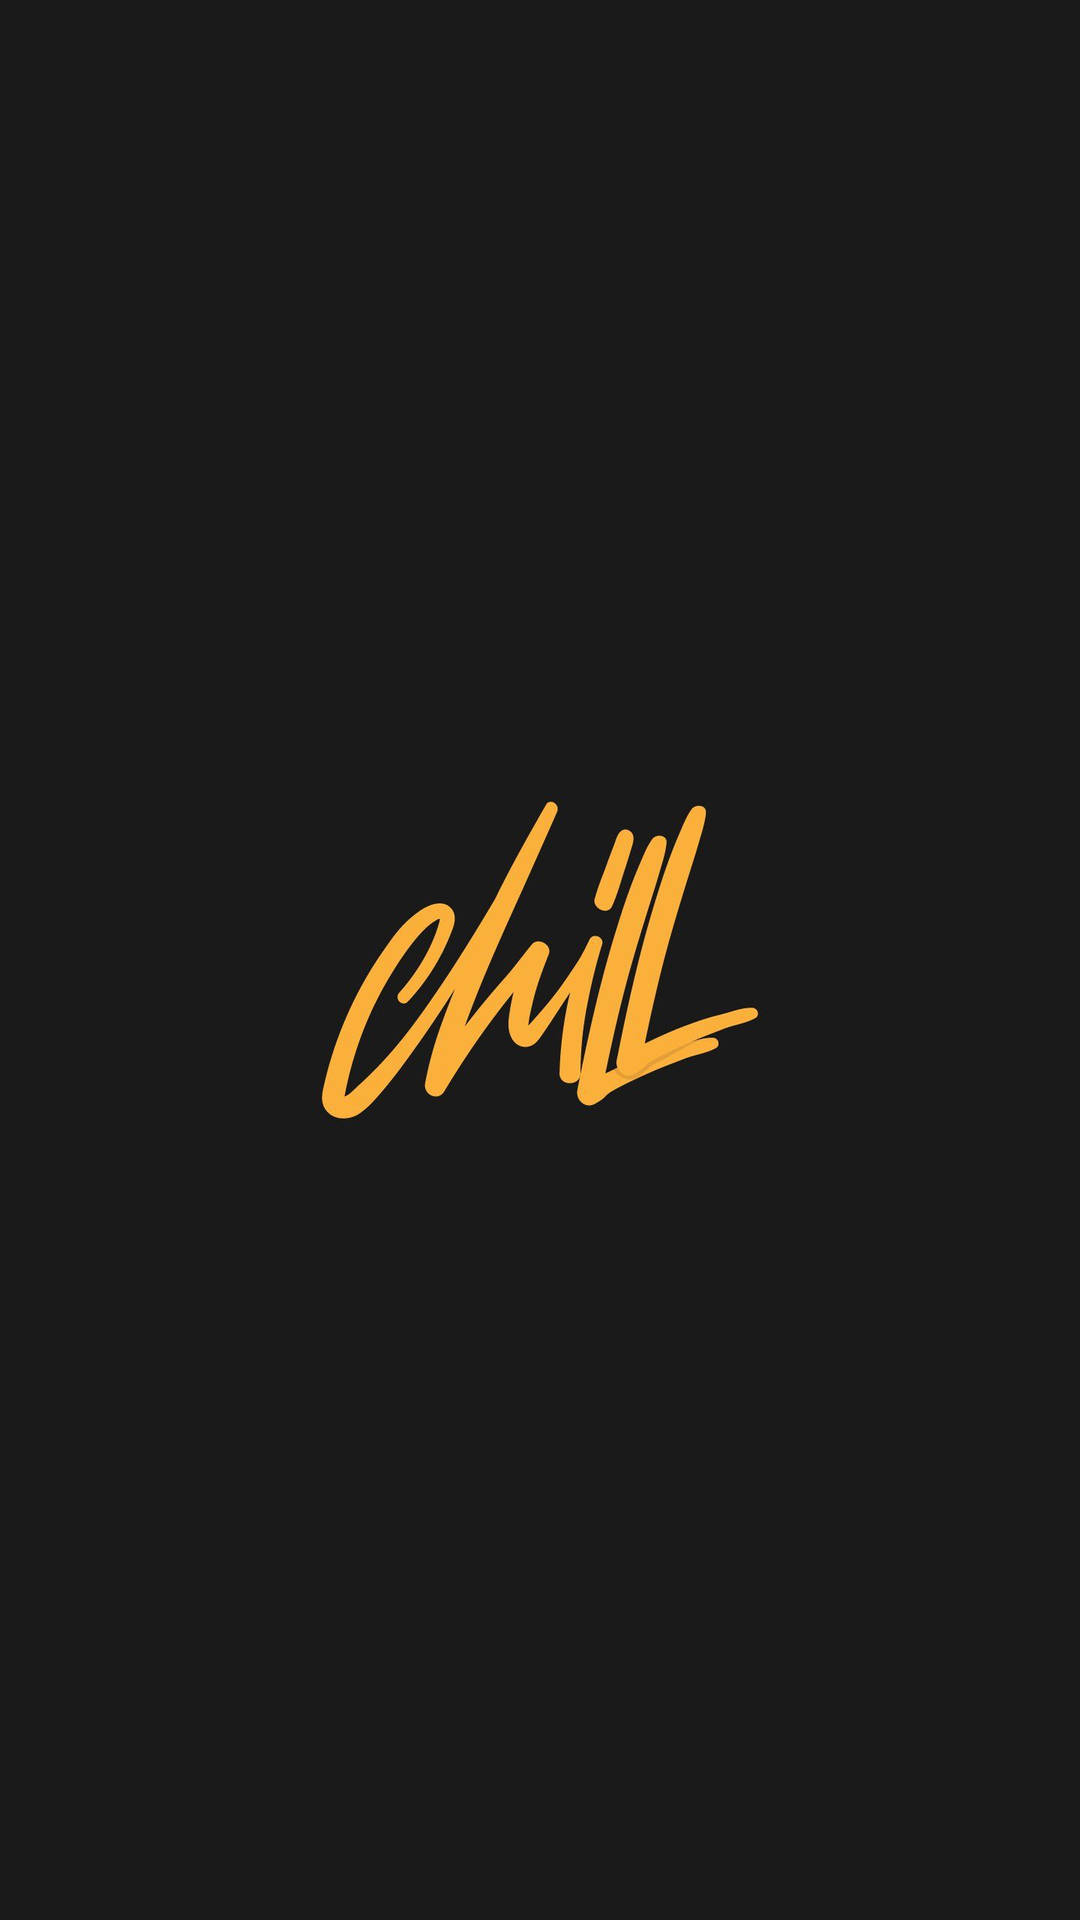 Chill Black And Yellow Lettering Background